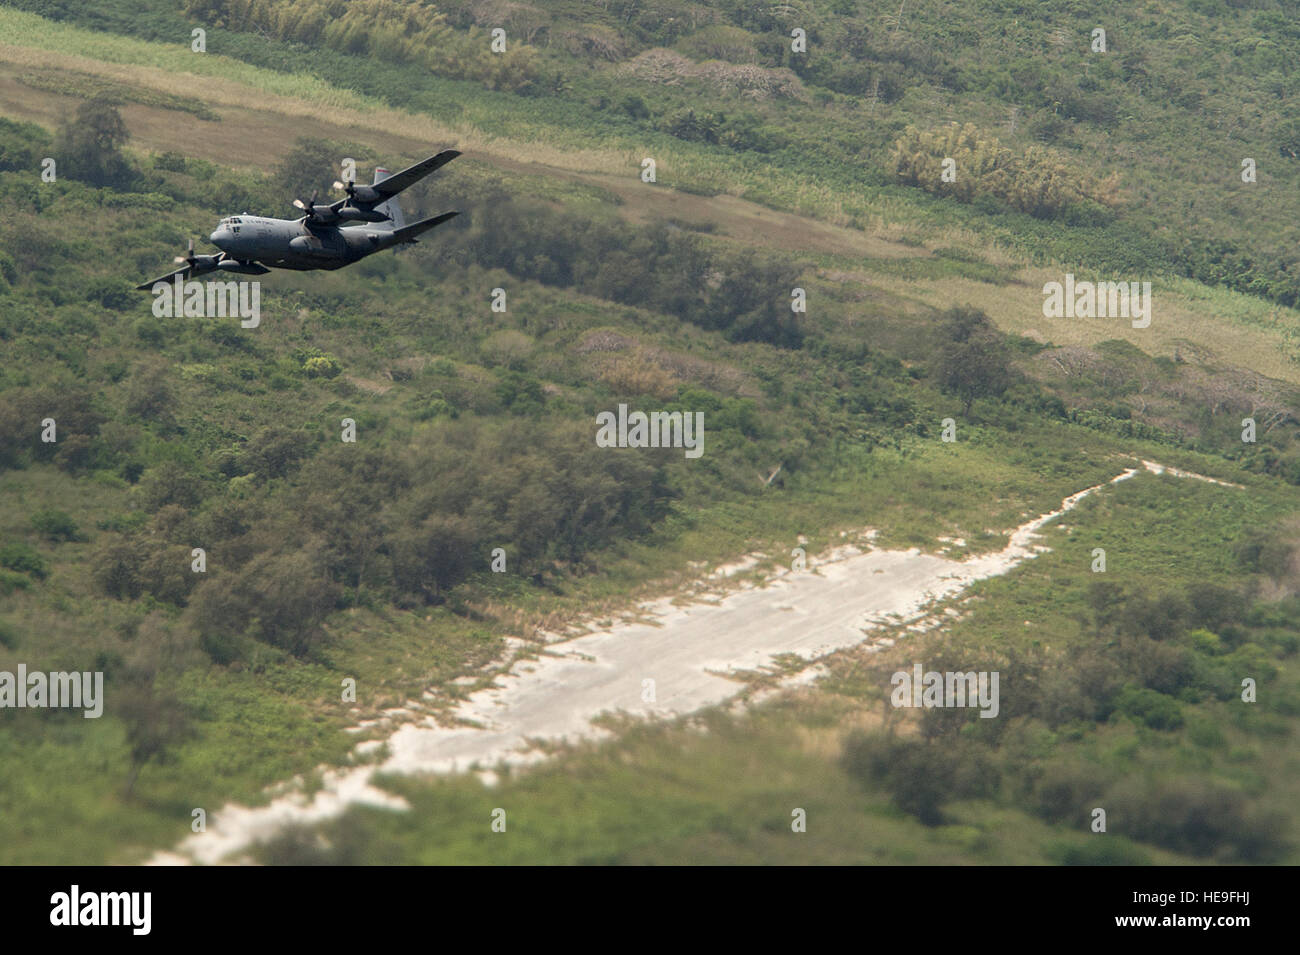 A U.S. Air Force C-130H Hercules flies over North Field, Tinian, Marianna Islands, during Cope North 15, Feb. 26, 2015. North Field served as the World War II headquarters for the 509th Composite Group that launched the atomic bomb attacks against Hiroshima and Nagasaki, Japan, in August of 1945. Through training exercises such as Exercise Cope North 15, the U.S., Japan and Australia air forces develop combat capabilities, enhancing air superiority, electronic warfare, air interdiction, tactical airlift and aerial refueling.  Tech. Sgt. Jason Robertson Stock Photo